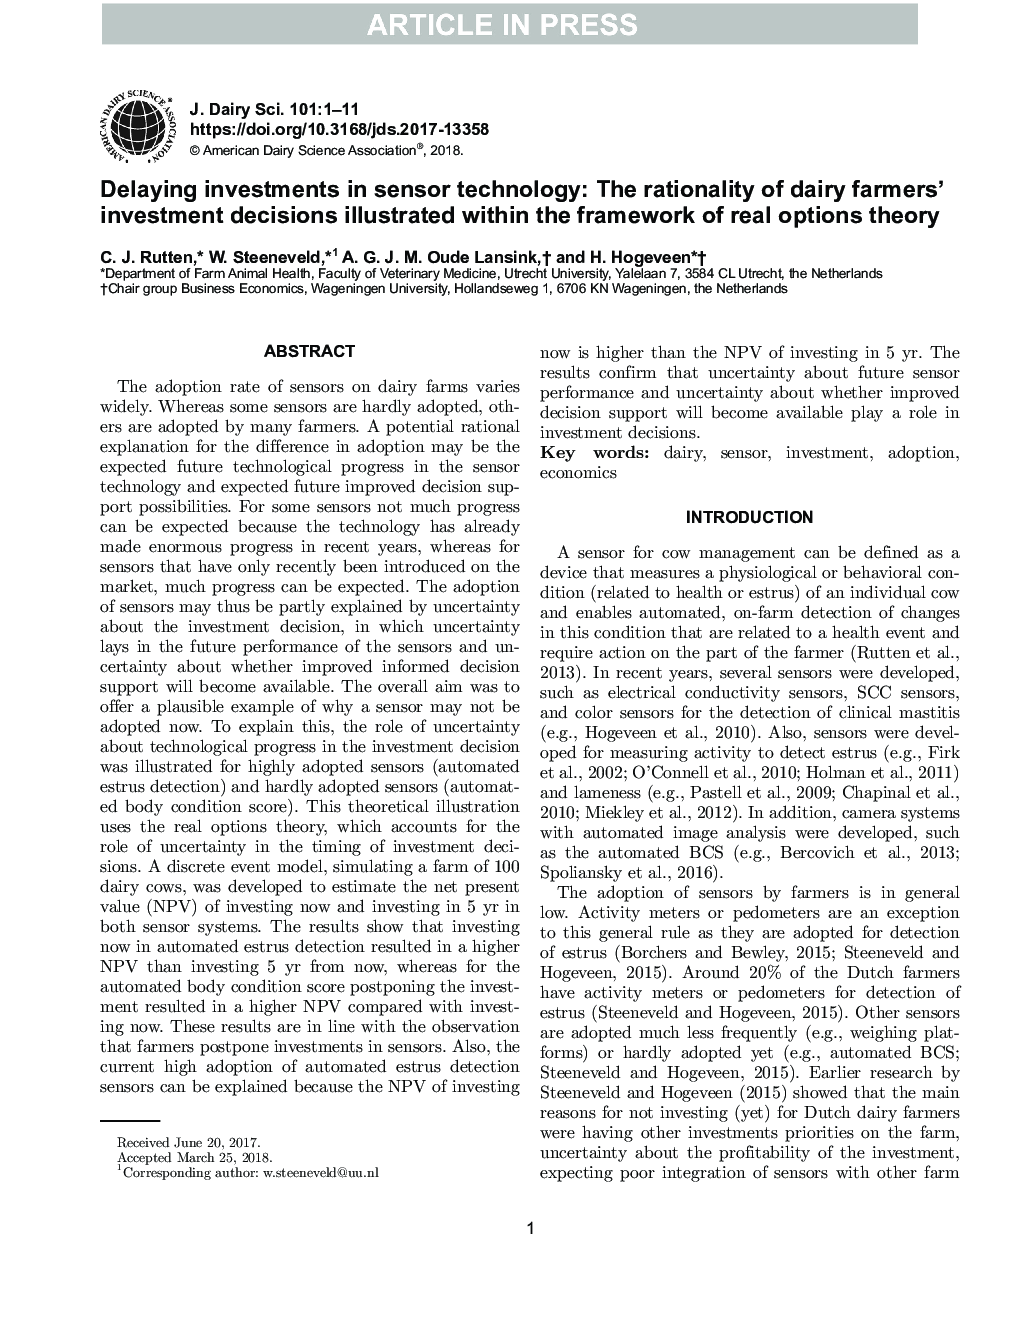 Delaying investments in sensor technology: The rationality of dairy farmers' investment decisions illustrated within the framework of real options theory